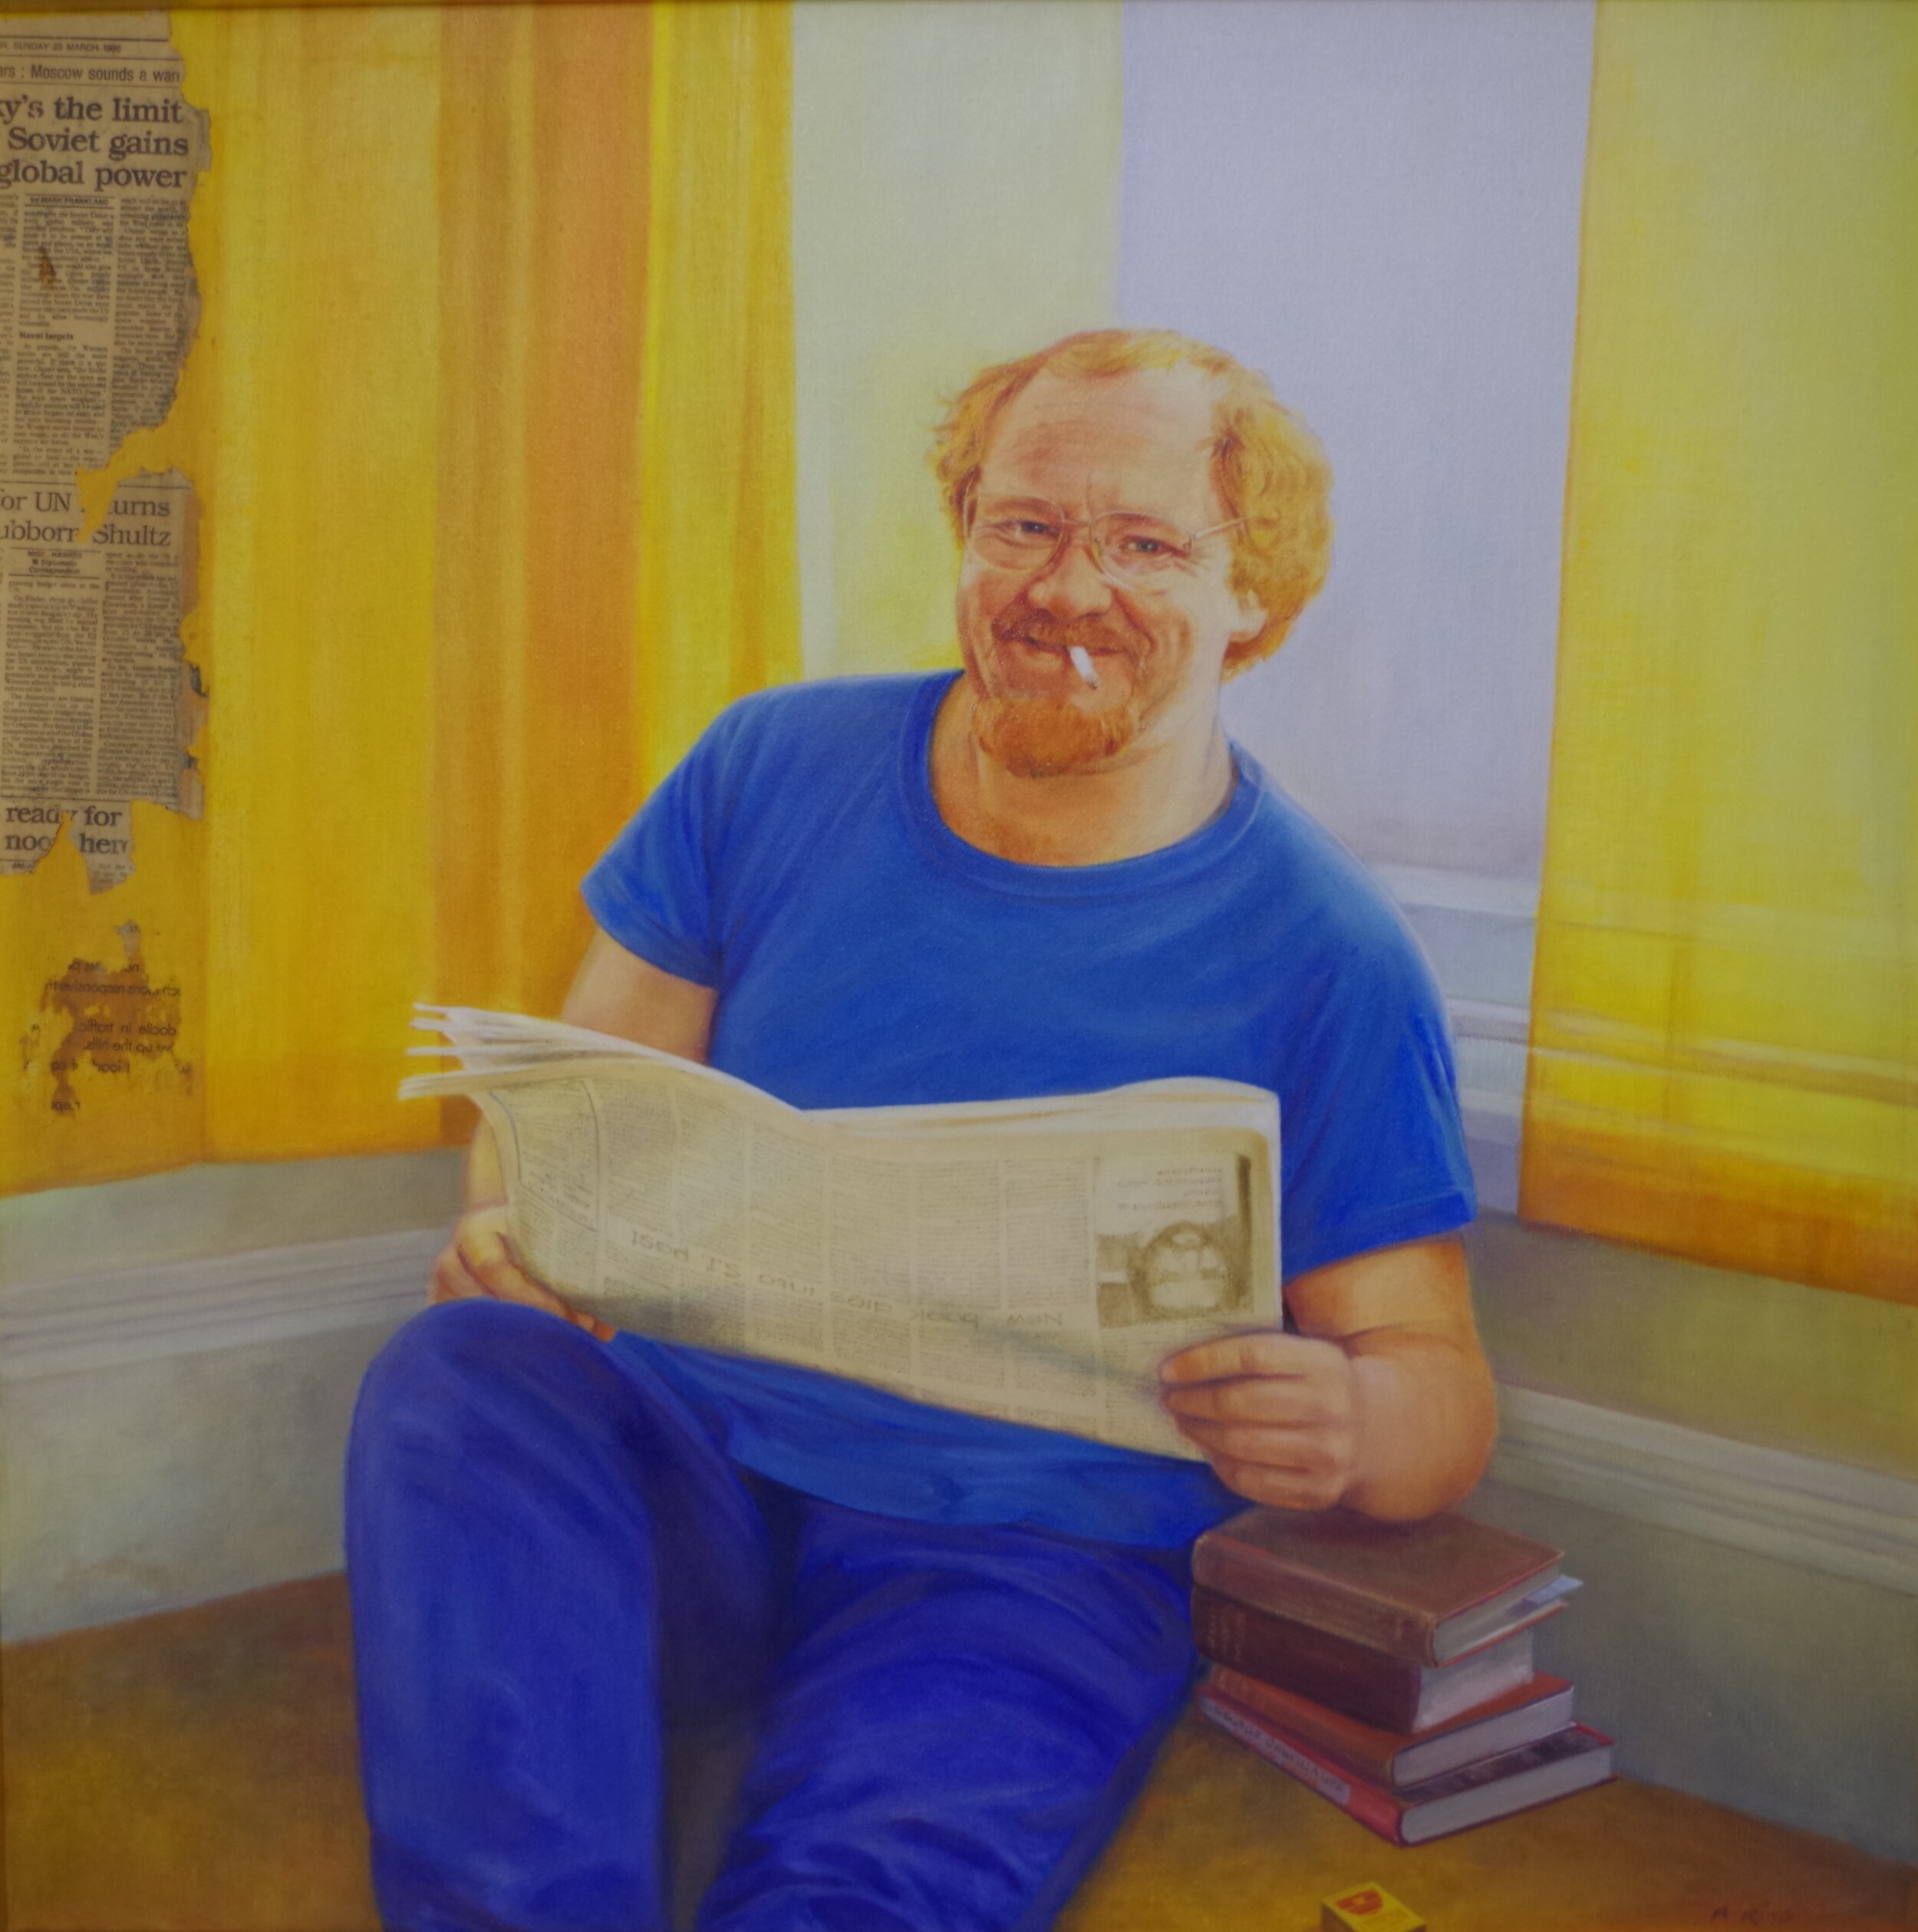  Robyn North King,  Portrait of Peter Hawes , 1986  Oil on canvas, New Zealand Portrait Gallery Collection, Gift of Jackie Abdust  